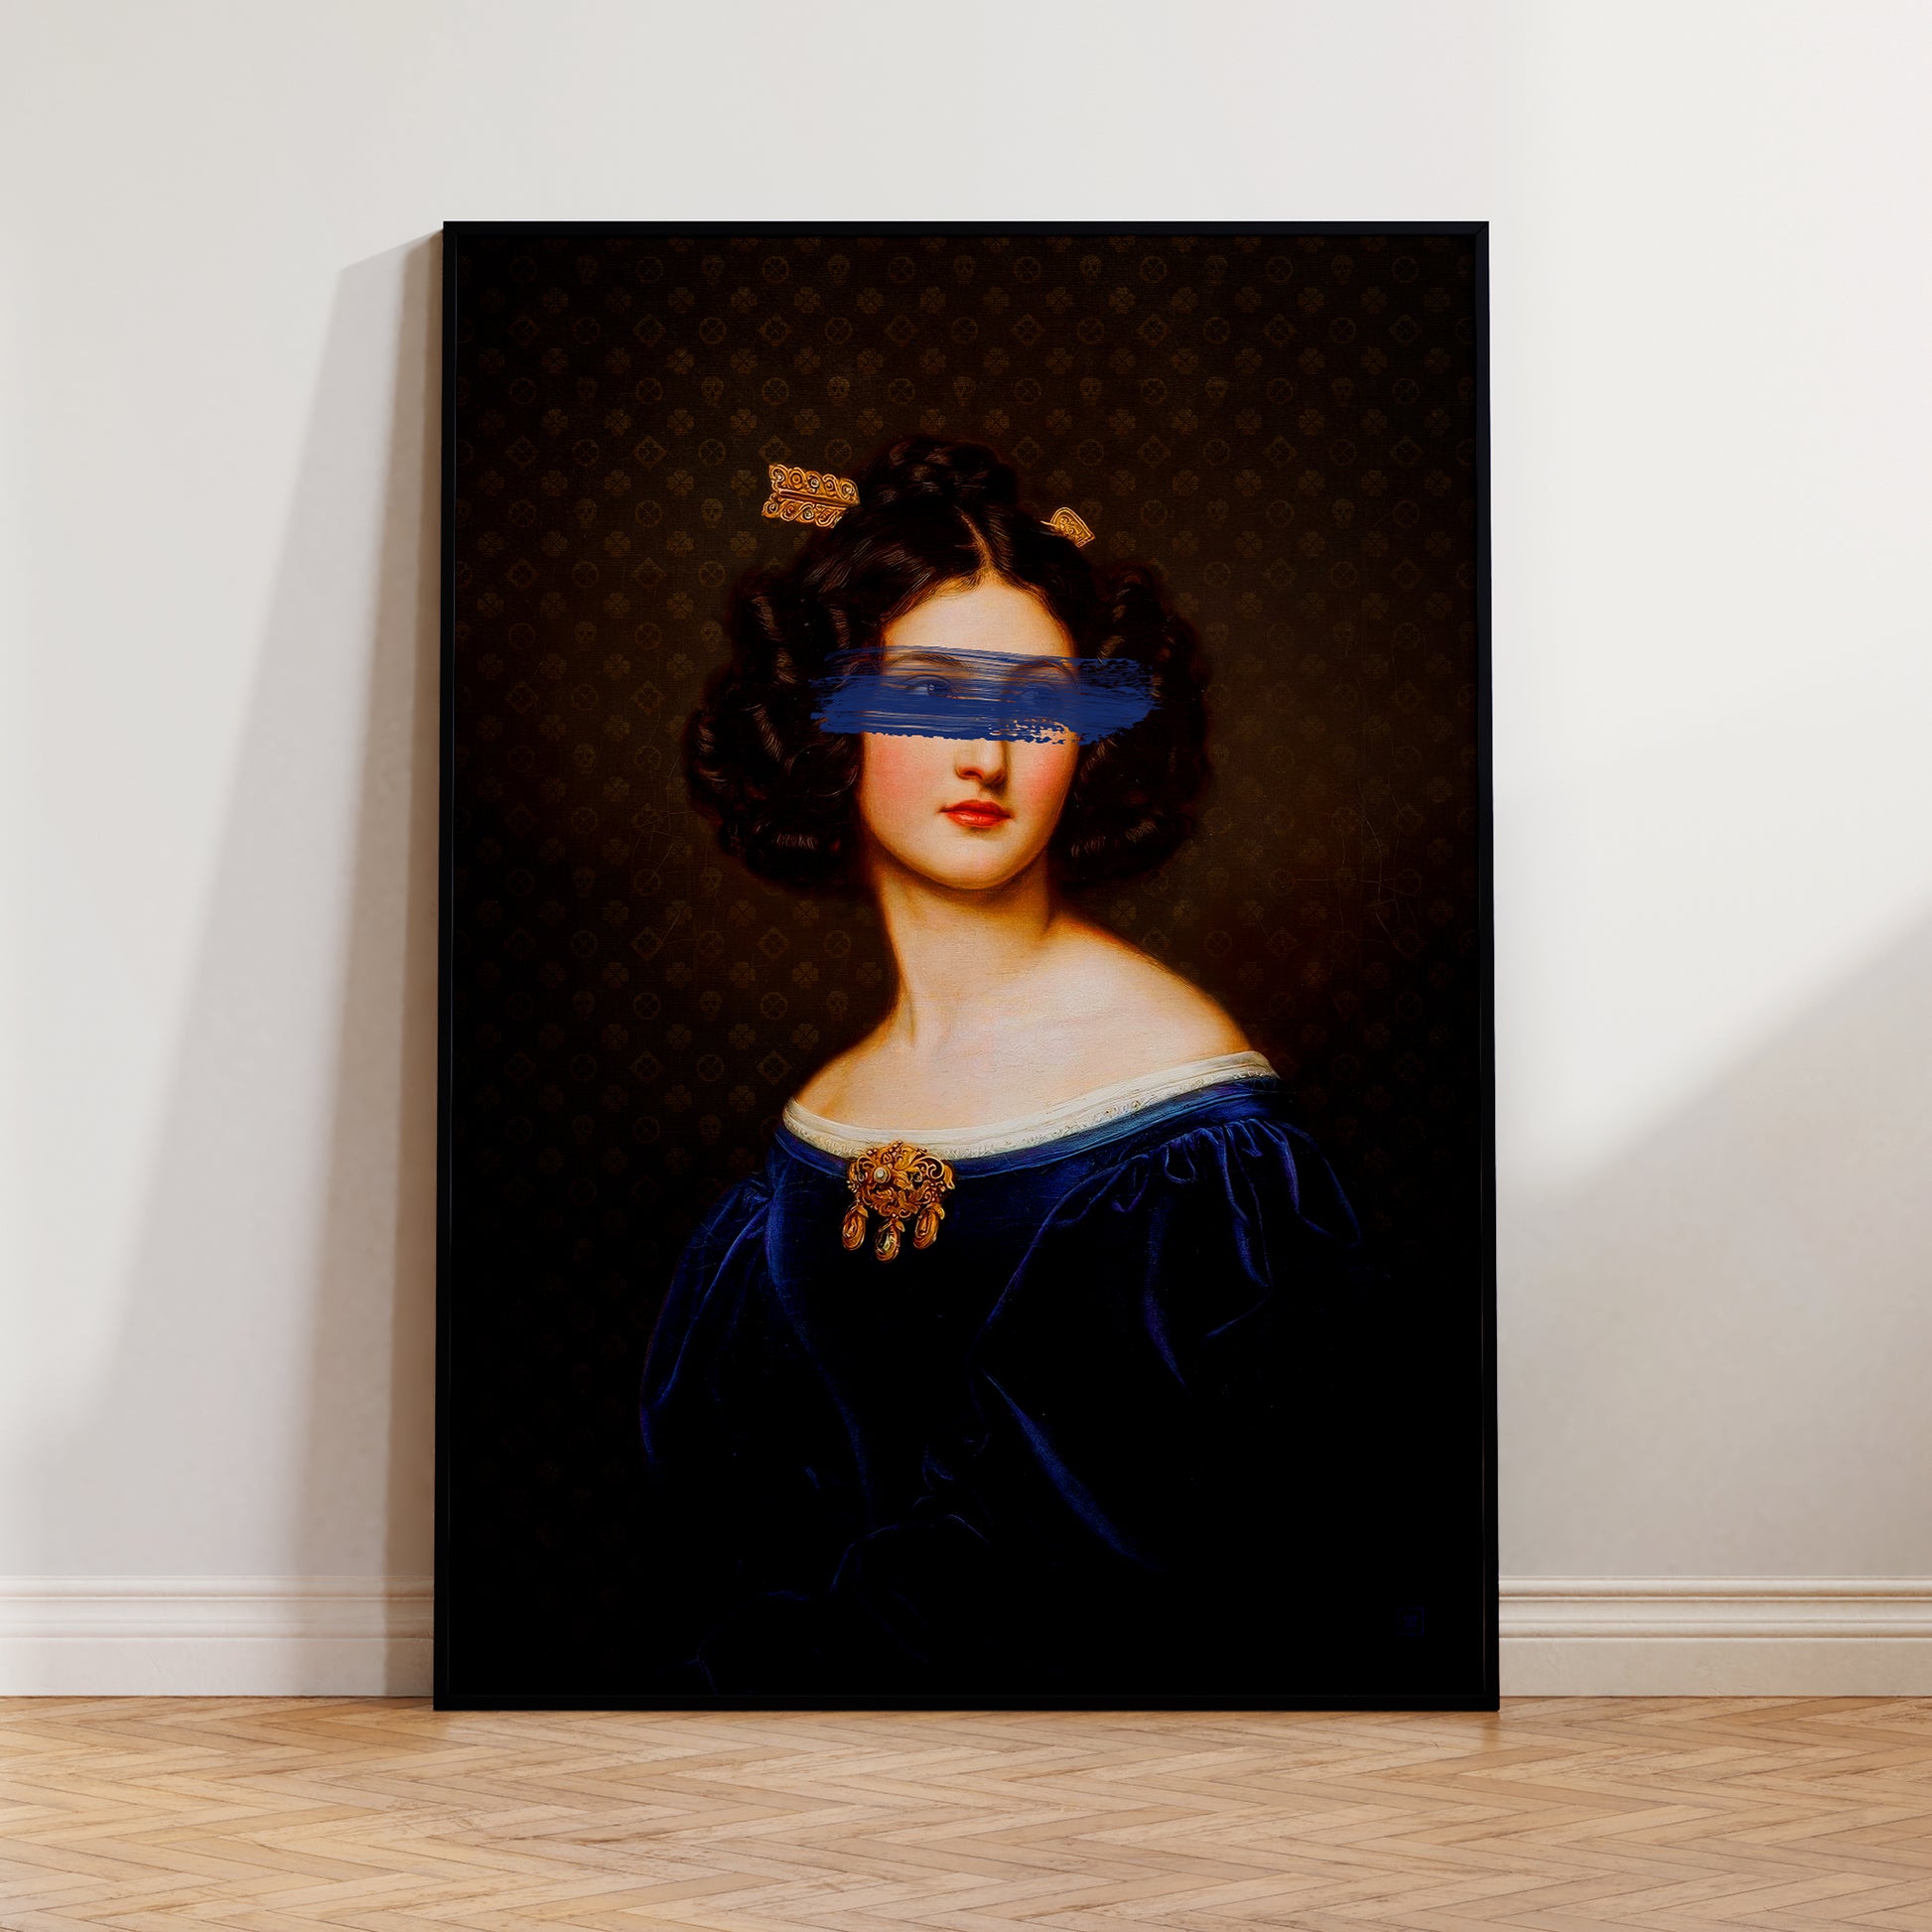 Be inspired by our "Dark and Moody Portrait of Nanette" art print! This artwork has been printed using the giclée process on archival acid-free paper and is elegantly displayed in a modern black frame, highlighting its timeless beauty in every detail.